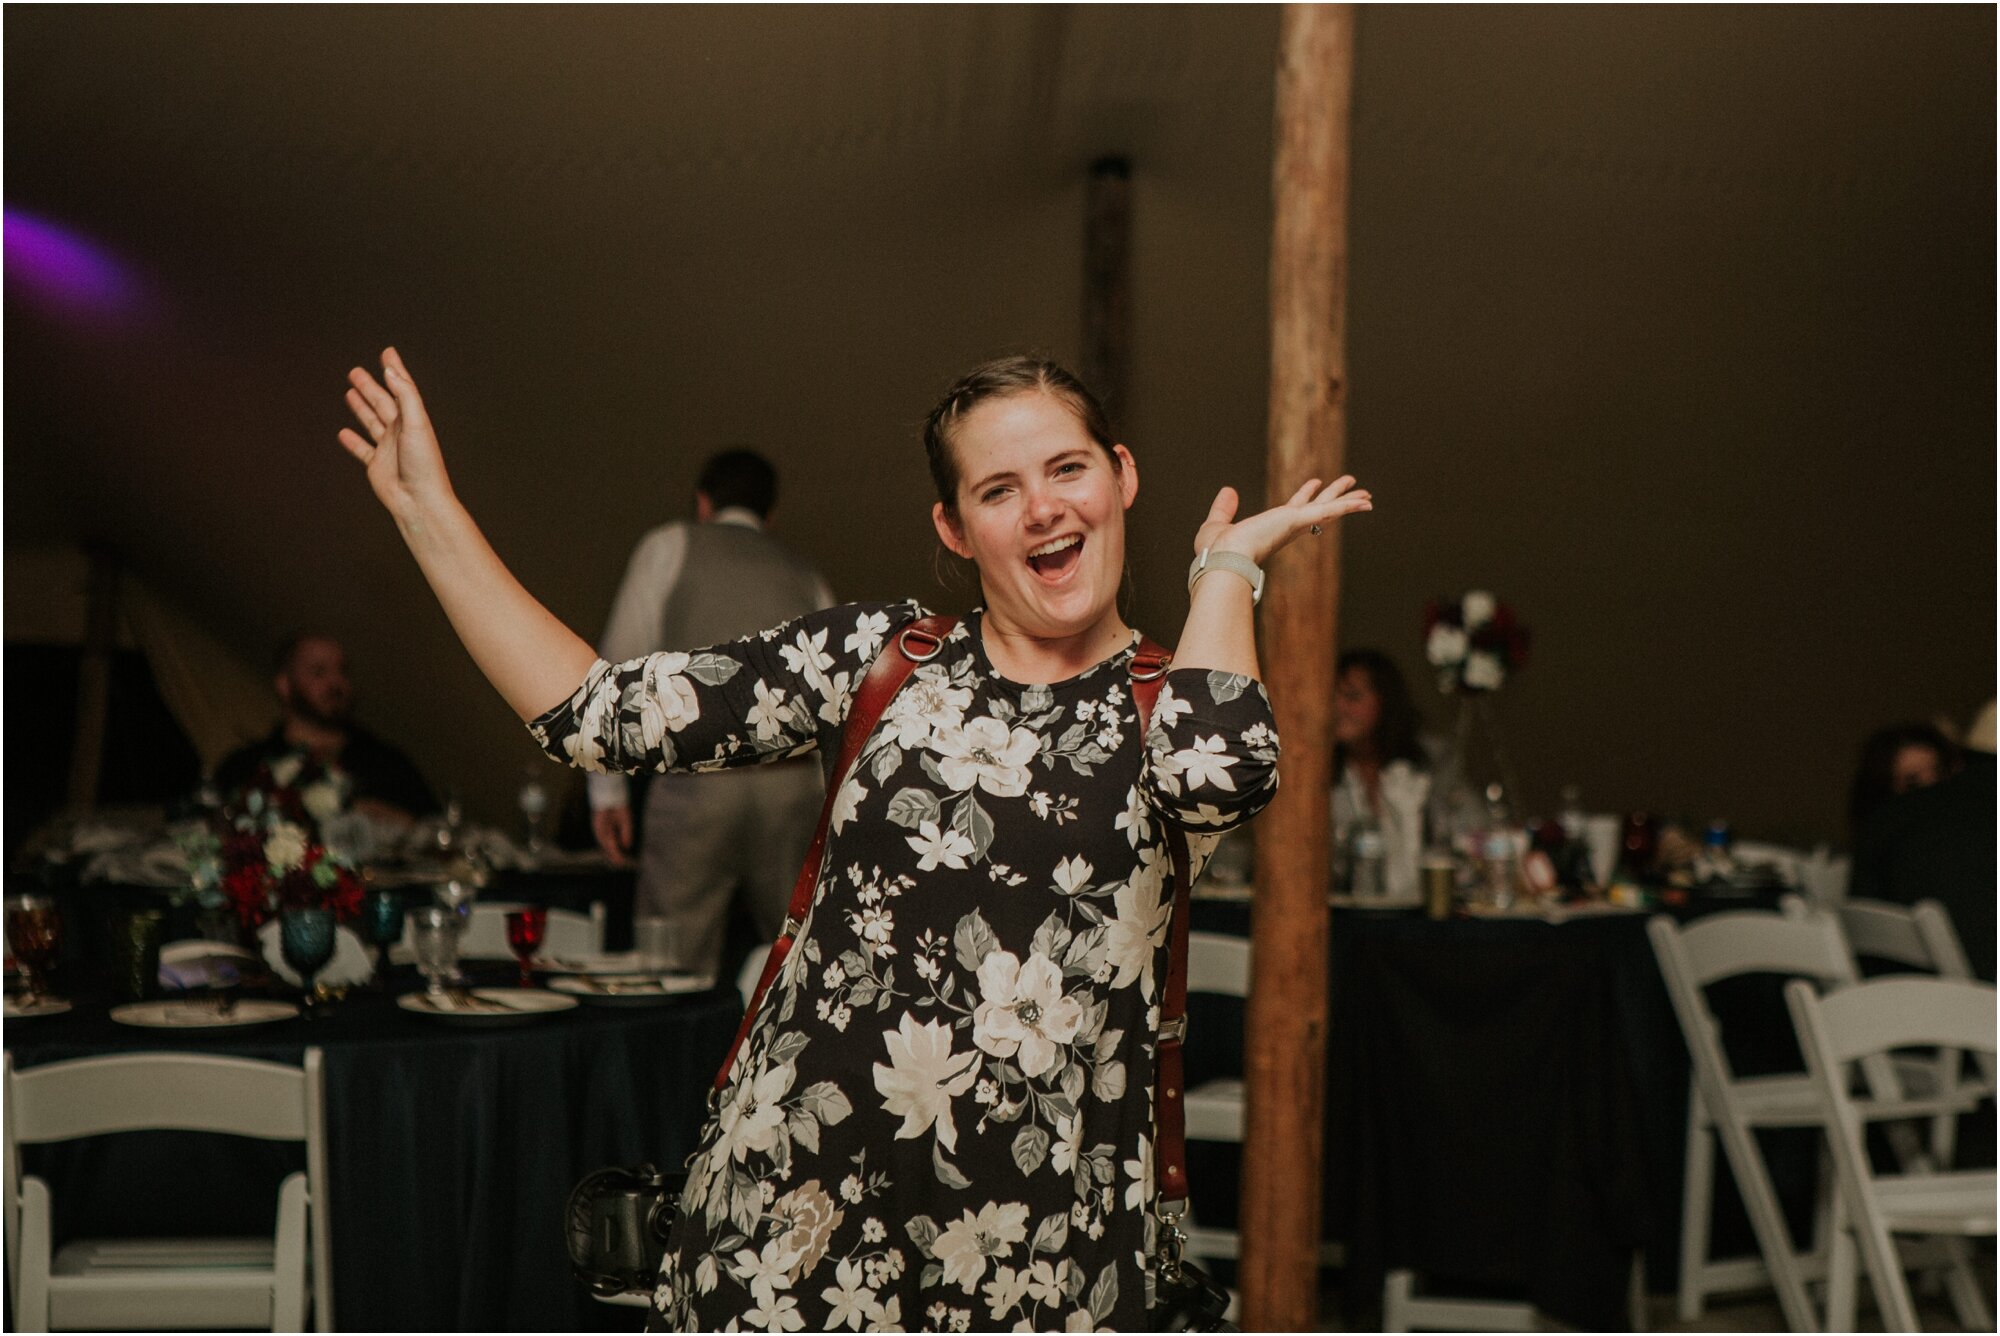   Having way too much fun at Lakyn and Neal’s reception.   Photo: Pam Burke  